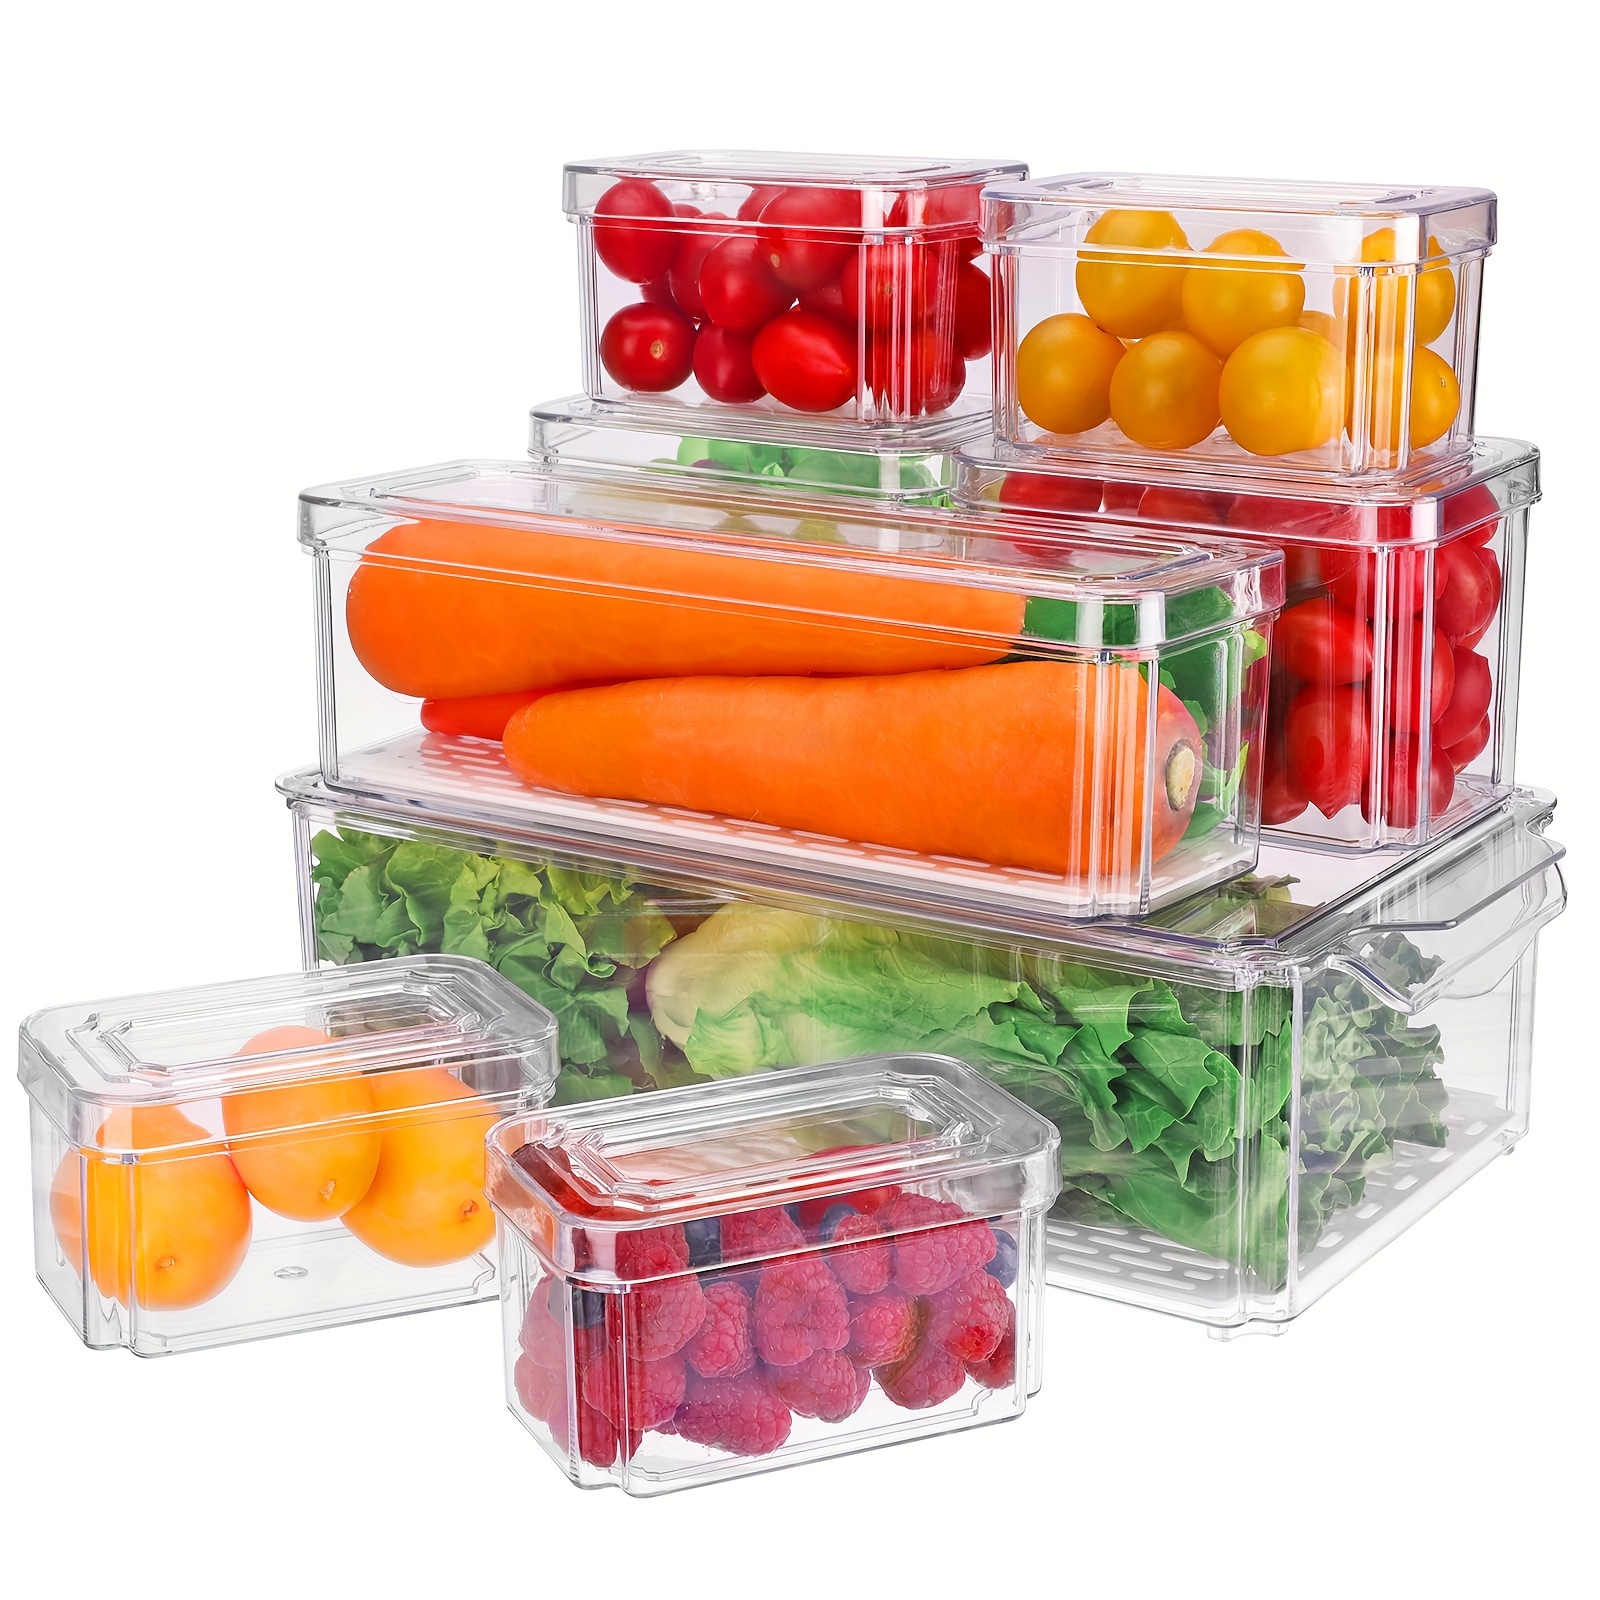 8pcs Set Refrigerator Storage Box, Mini Refrigerator Storage Box With Lid,  Multi-Size Fruit Container Suitable For Food, Vegetable And Beverage, Home